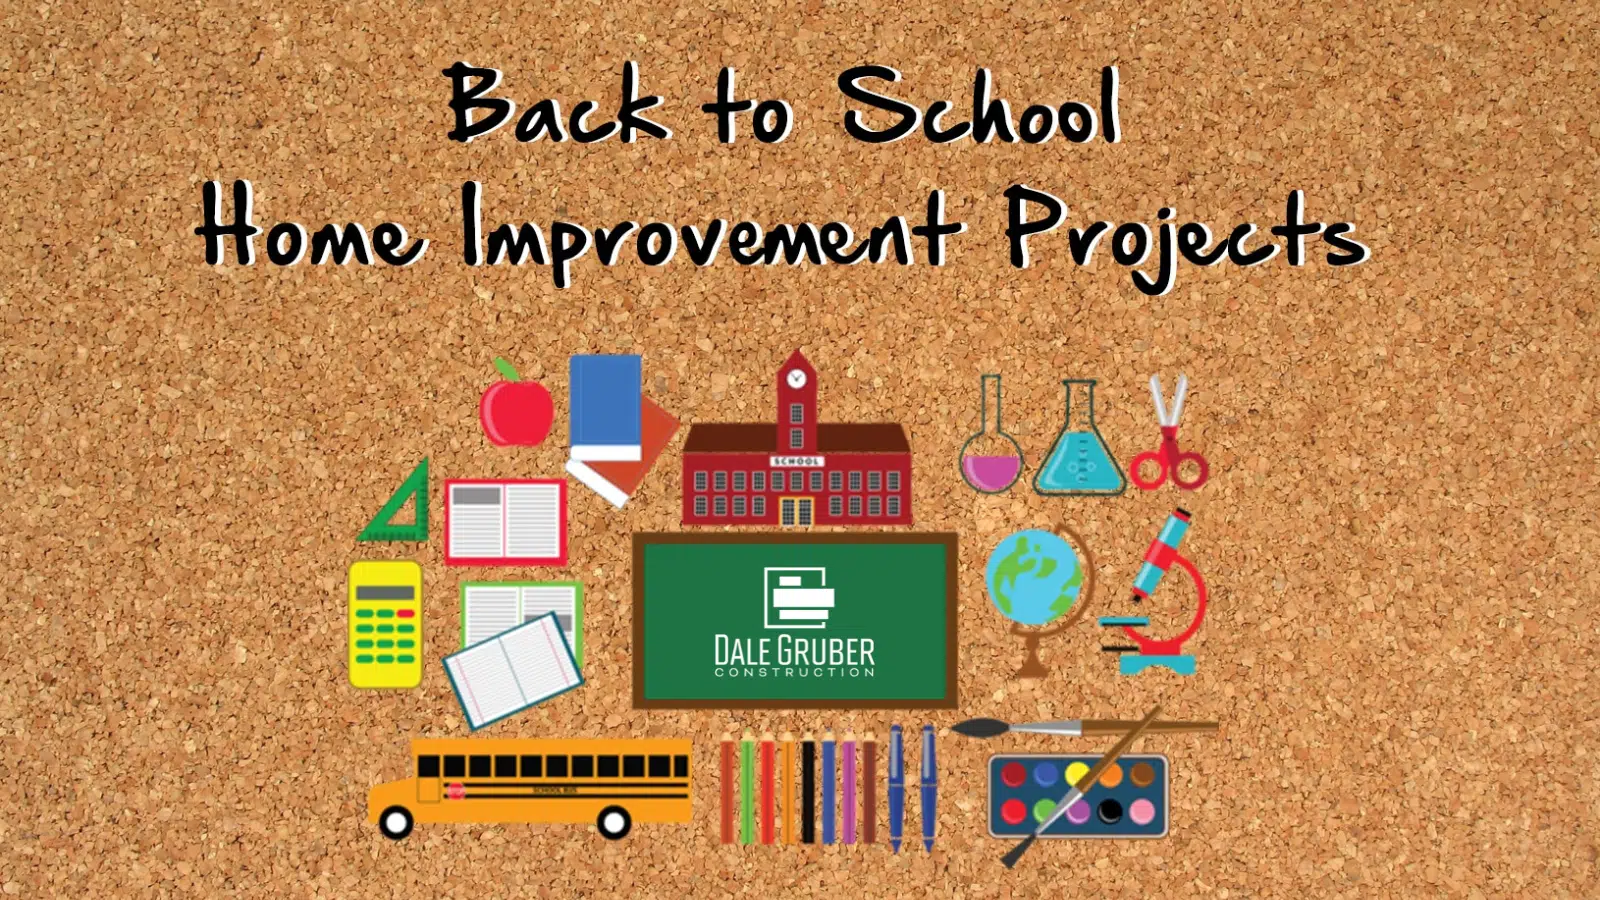 Back to School Home Improvement Projects!